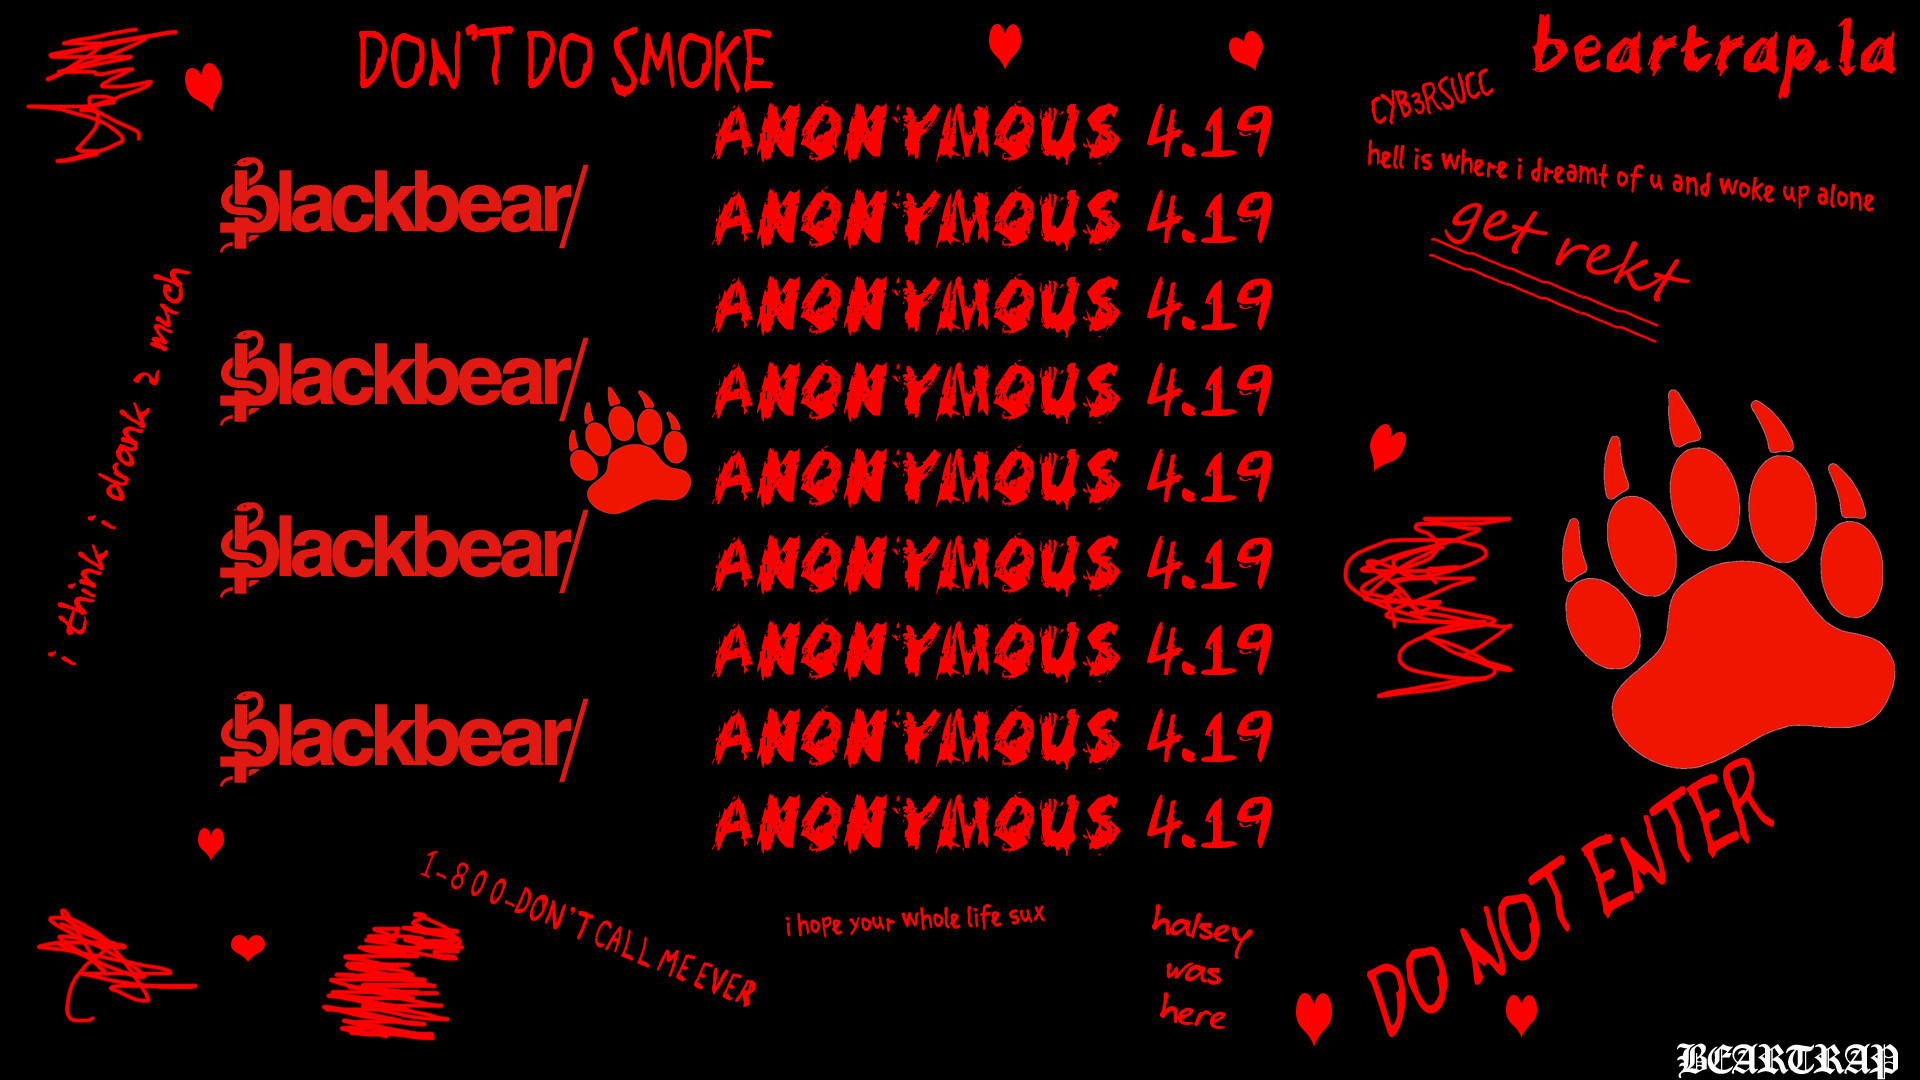 1920x1080 Anonymous wallpaper () Inspired by Blackbear's art style, and his  red and black scarf on his merch store ...